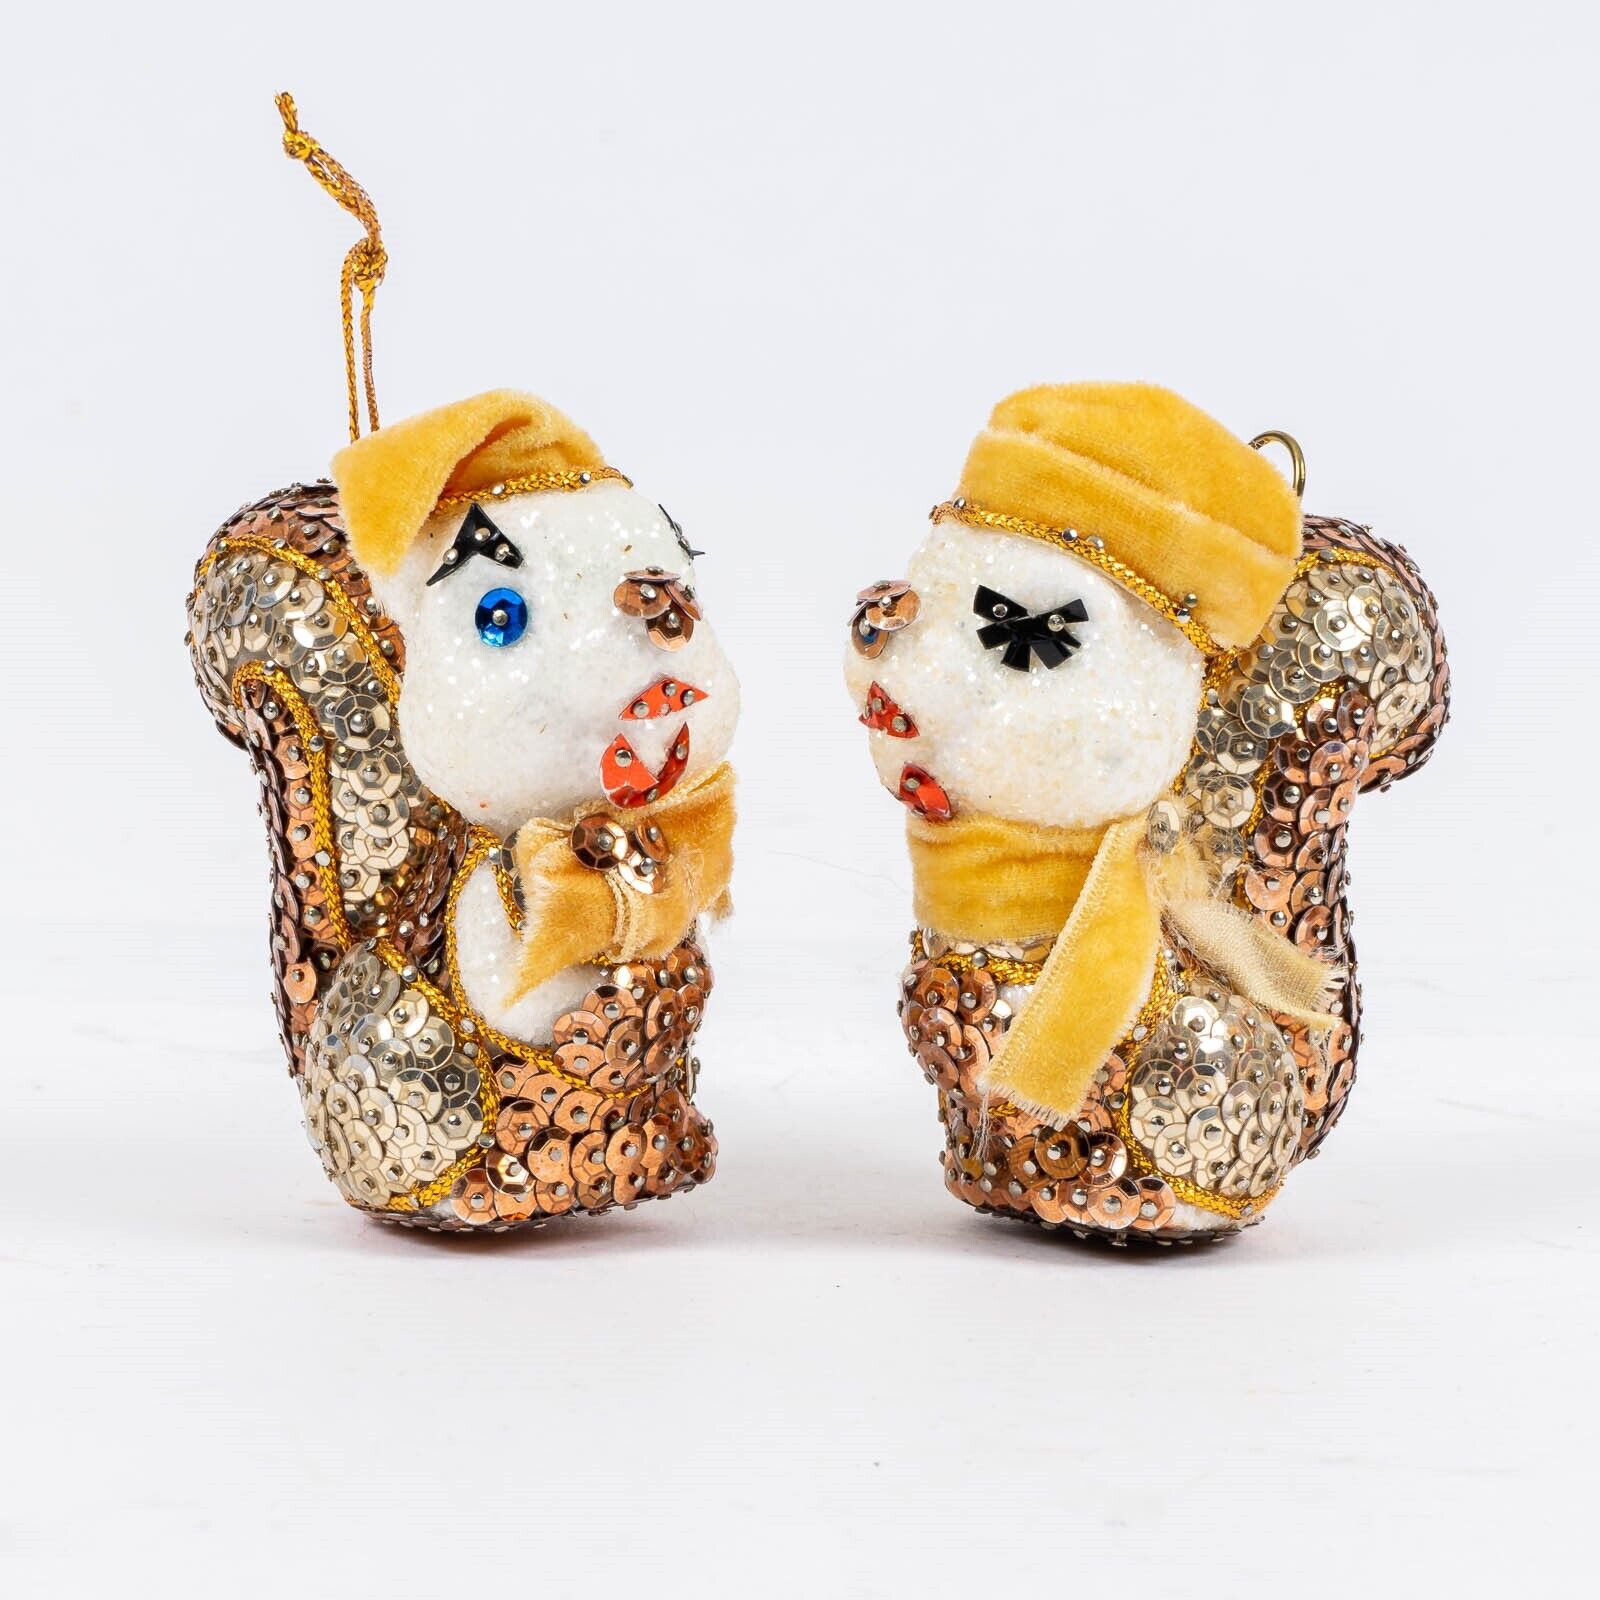 Leewards Mr. & Mrs. Chatter Sequined Squirrel Christmas Ornaments Handmade